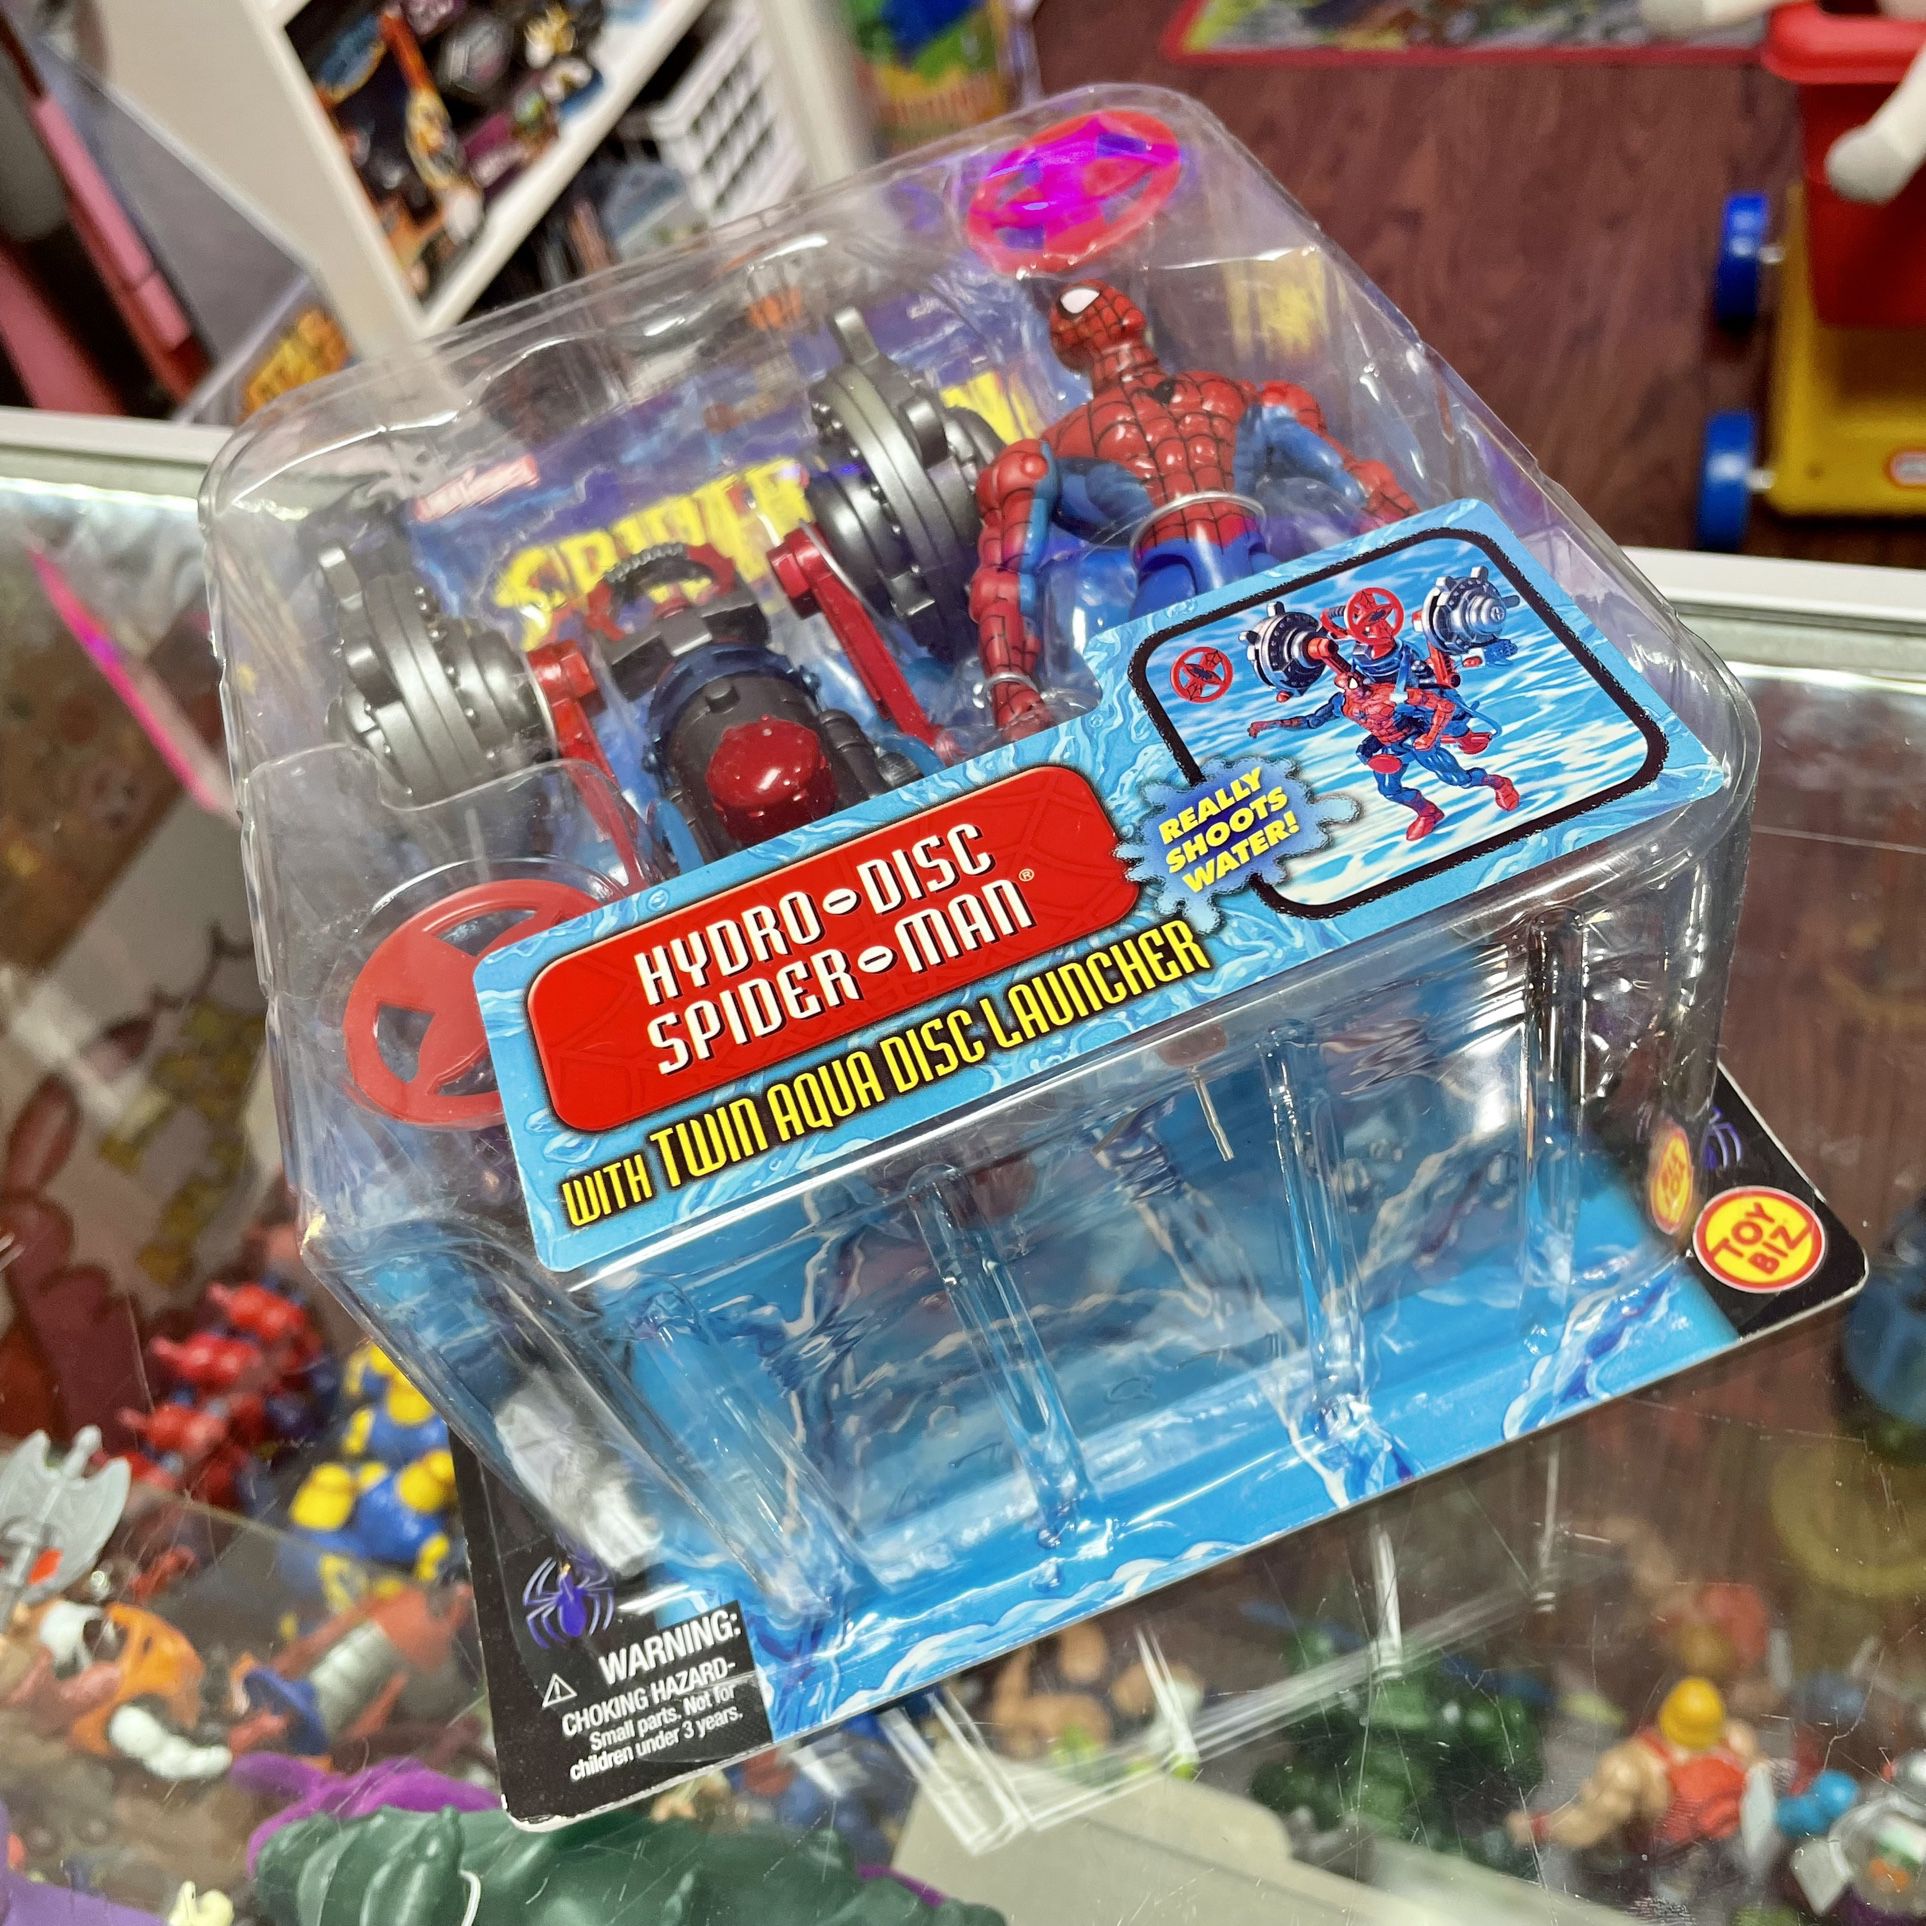 Vintage 2001 Toy Biz Marvel Spider-Man Classics Water Wars Hydro-Disc With Twin Aqua Disc Launcher Action Figure Toy NIB